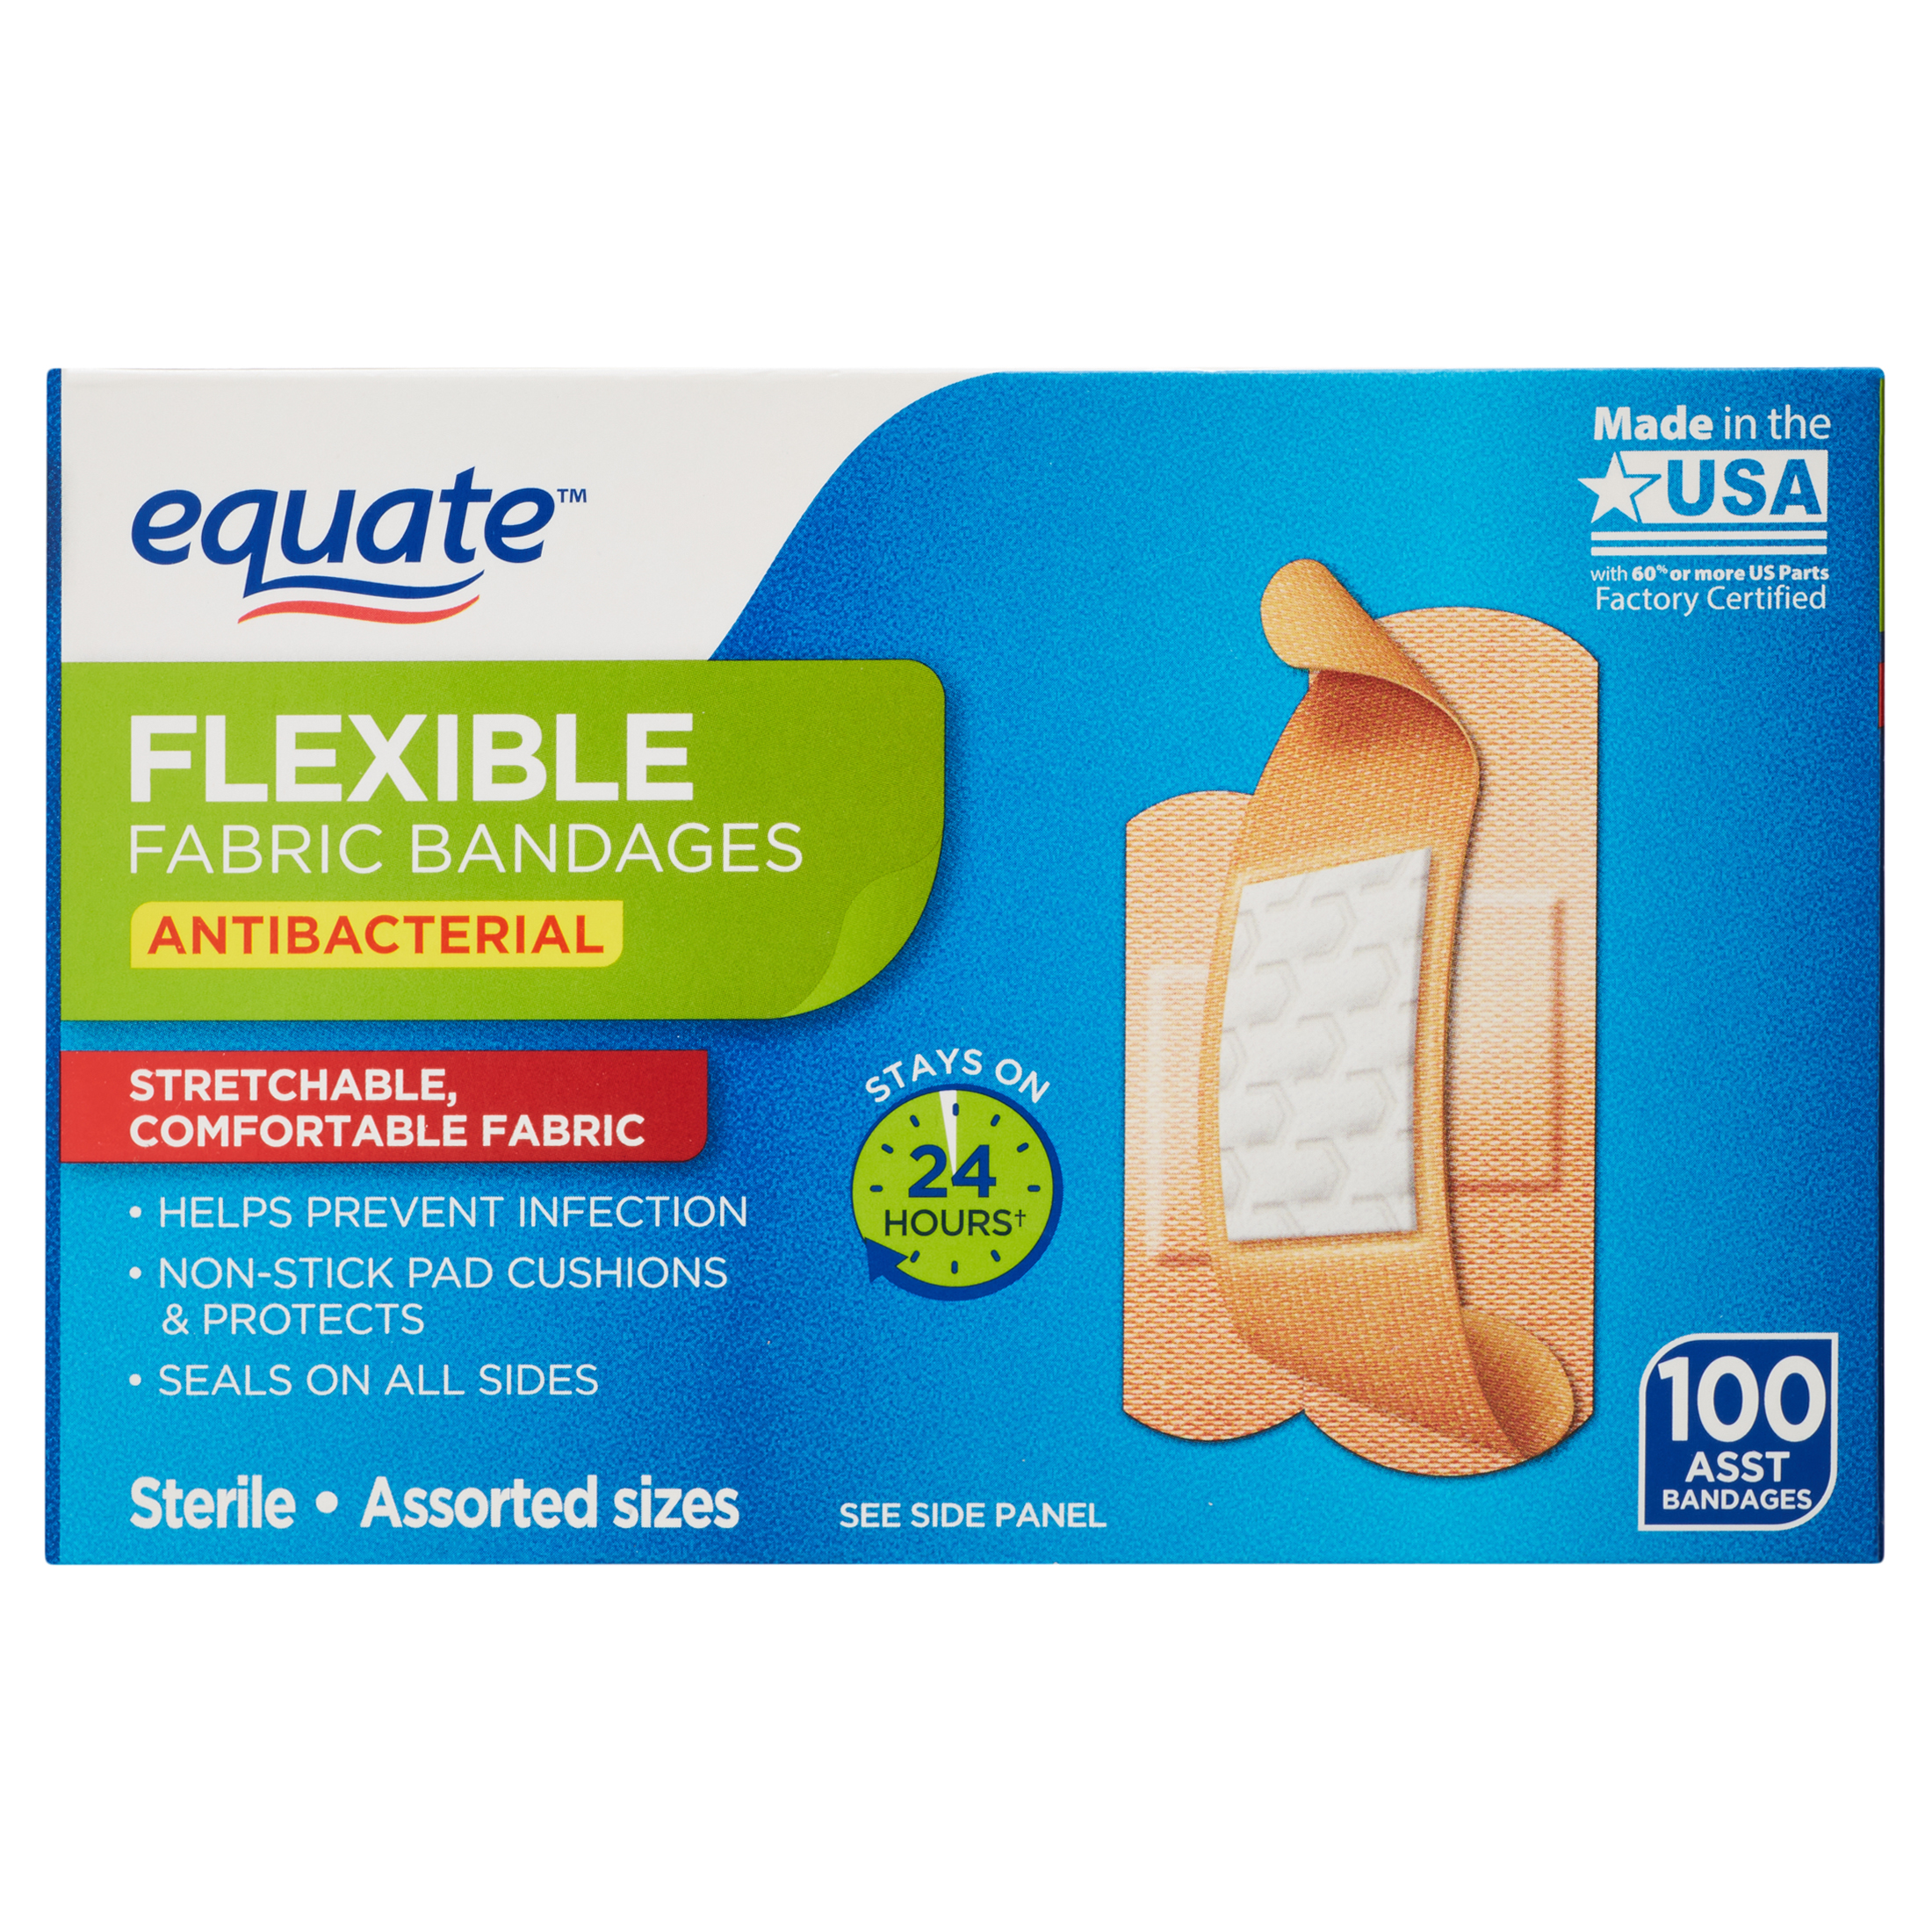 Equate Antibacterial Flexible Fabric Bandages, 100 Count - image 1 of 6